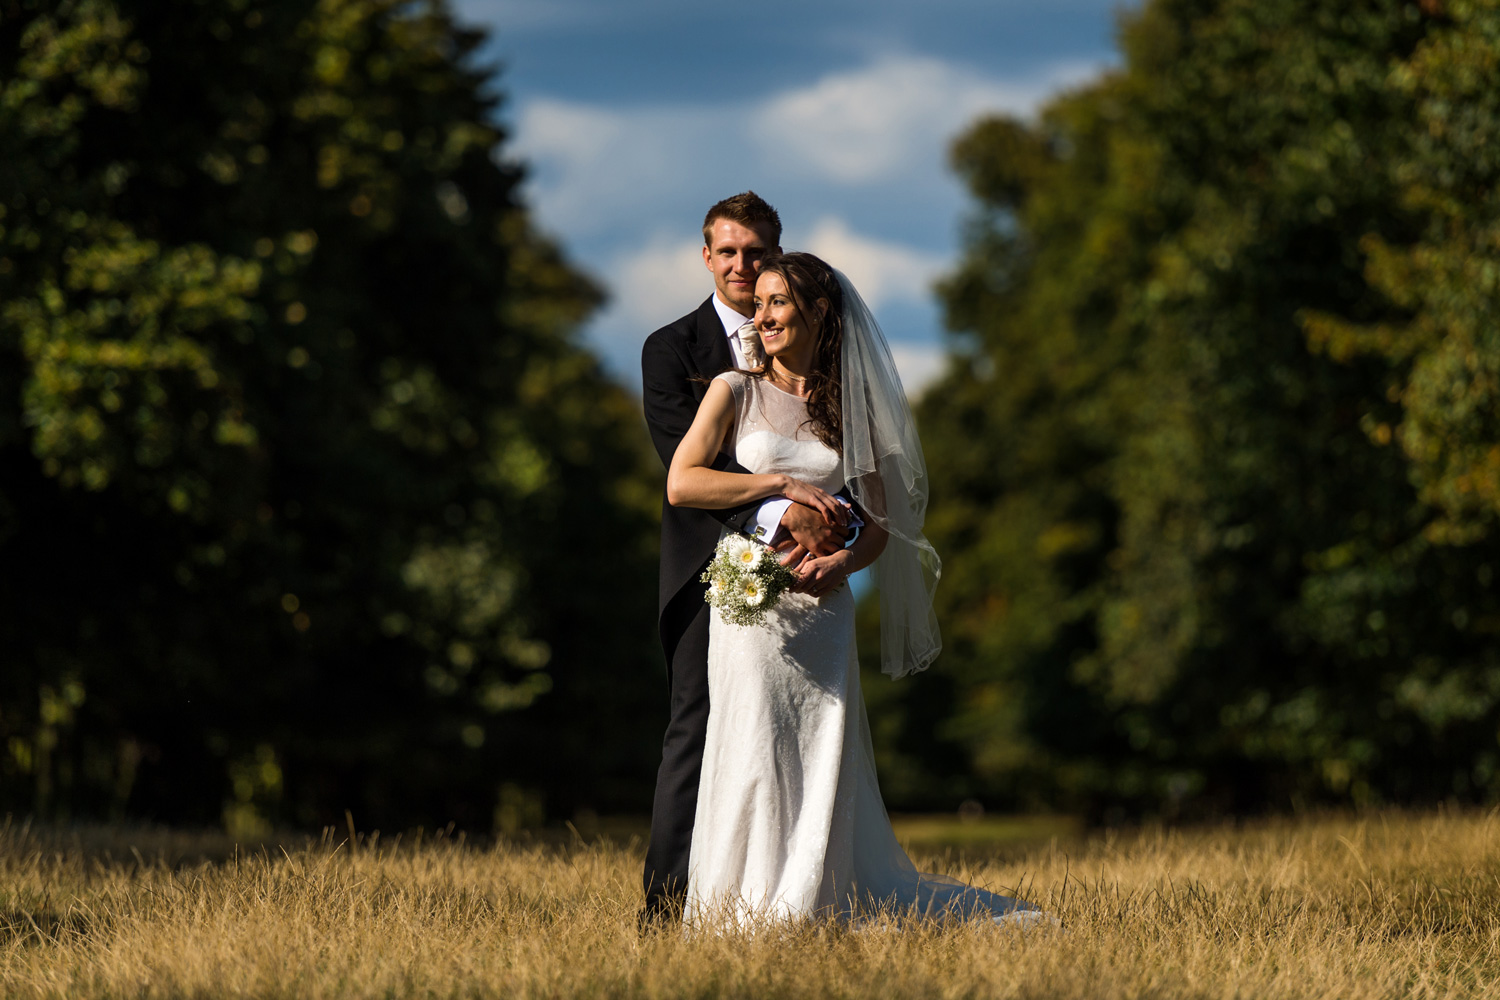 portrait of bride and groom in park